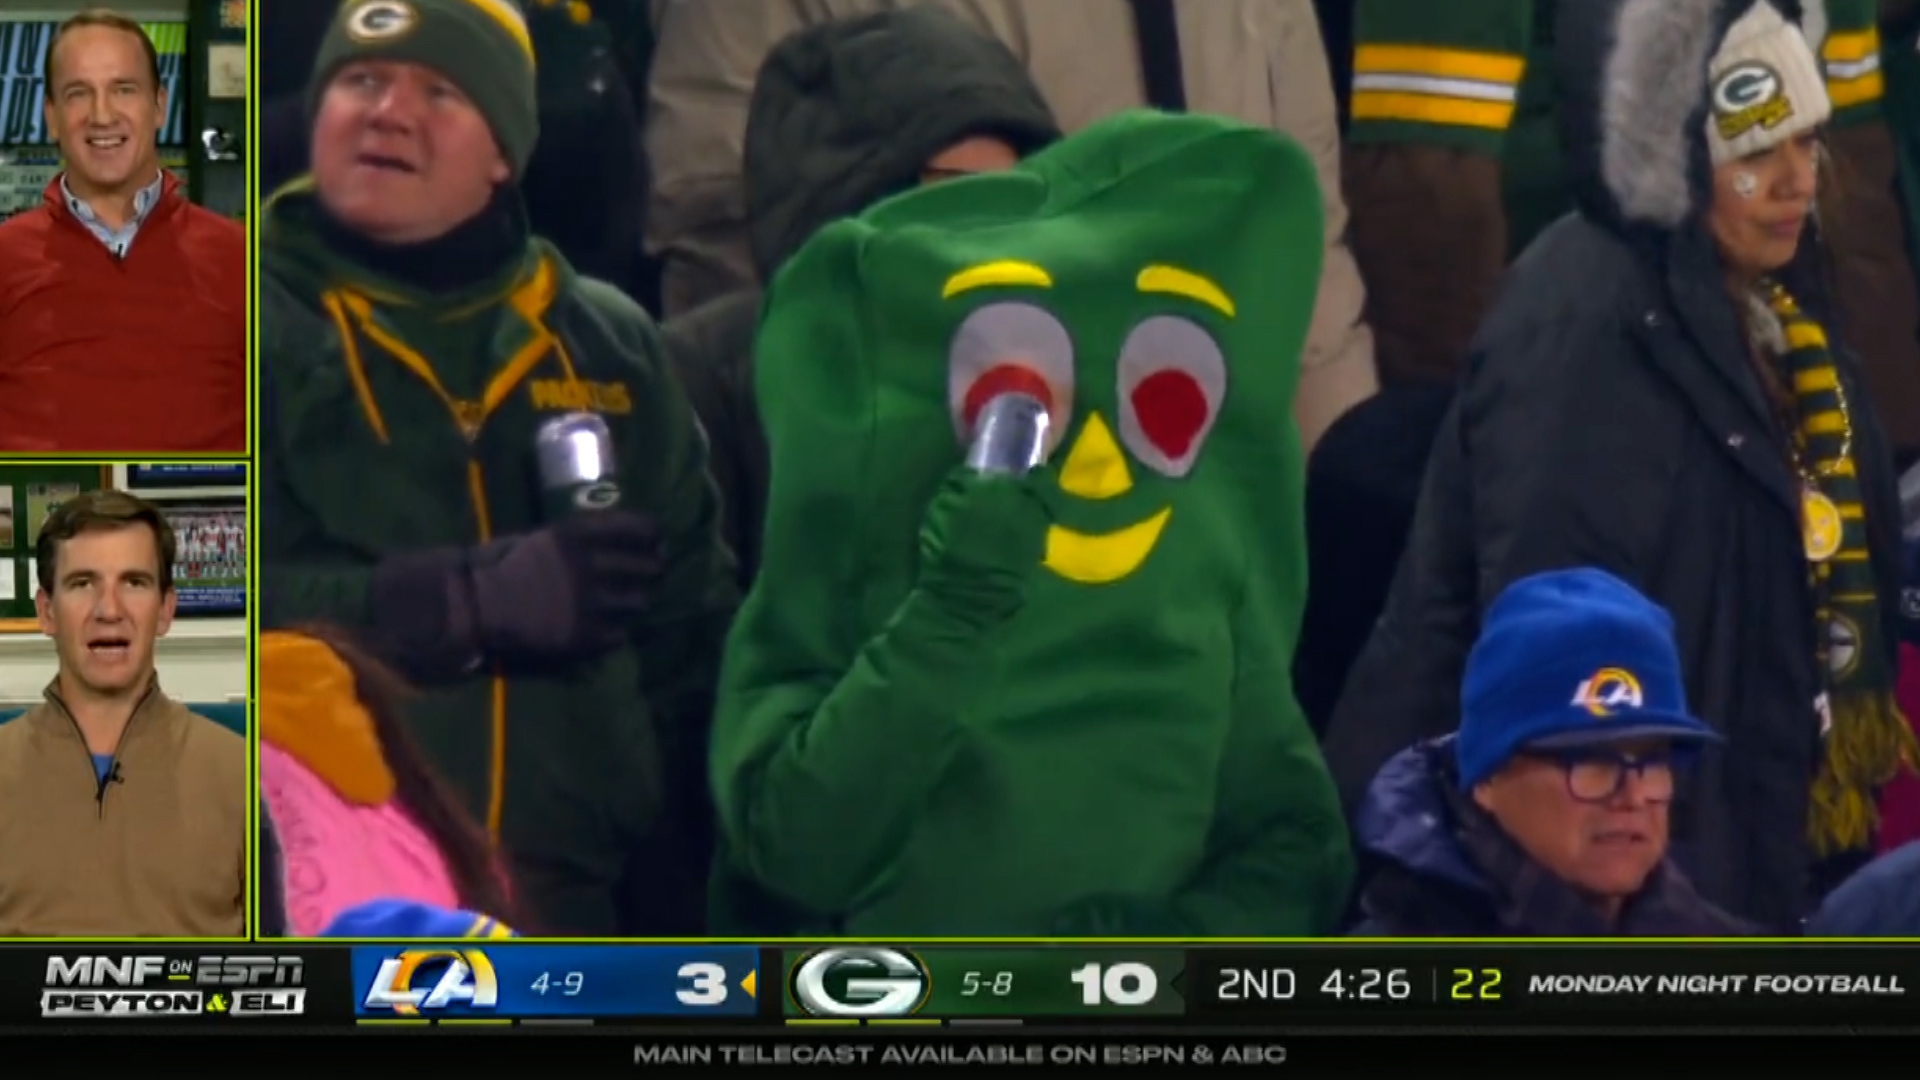 Manning brothers can't control laughter after spotting fan dressed in Gumby suit drinking beer through eye